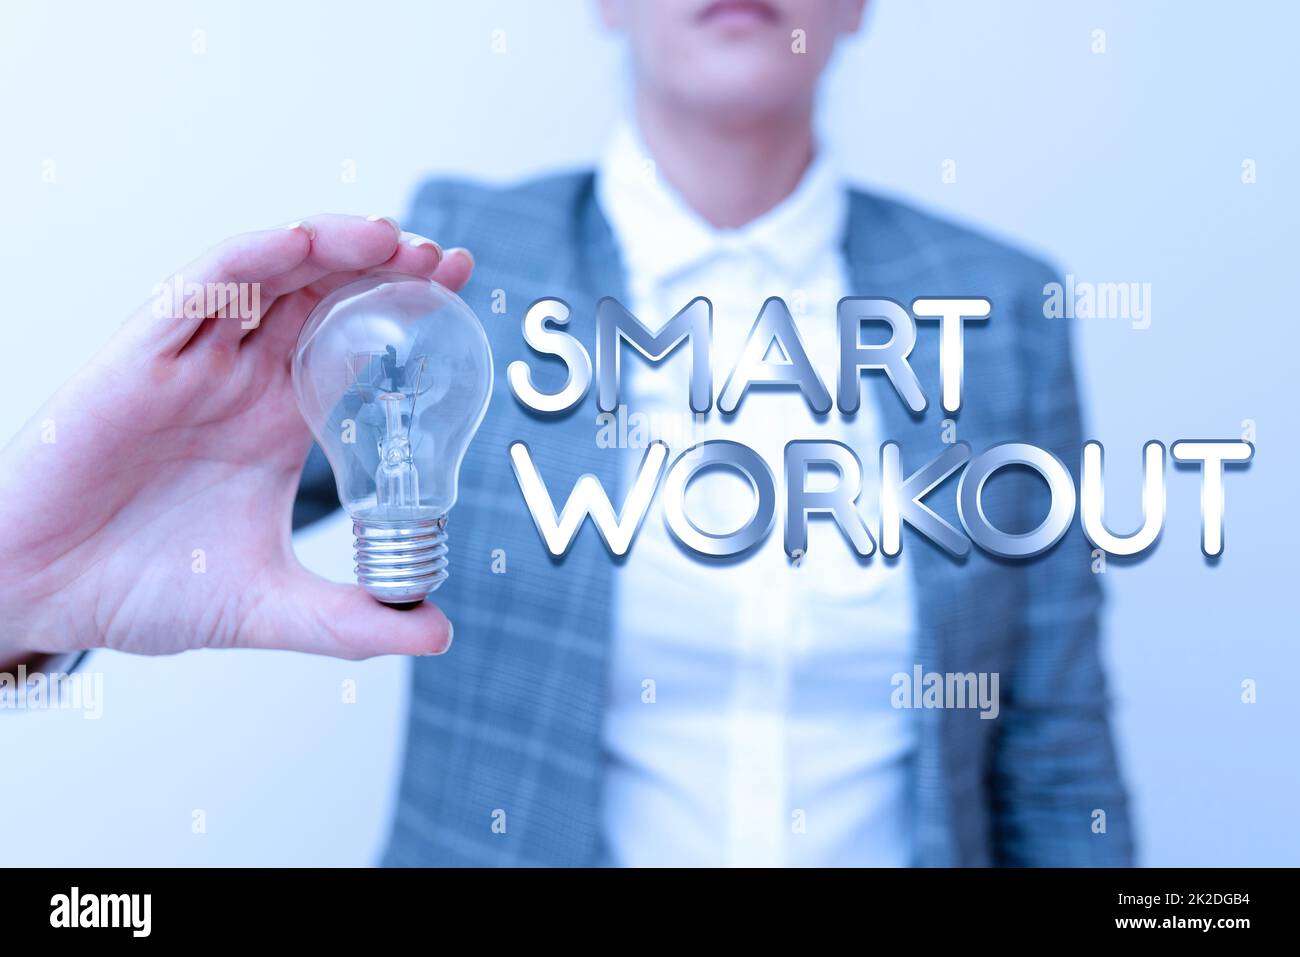 Inspiration showing sign Smart Workout. Business idea set a goal that maps out exactly what need to do in being fit Lady in business outfit holding lamp presenting new technology ideas Stock Photo